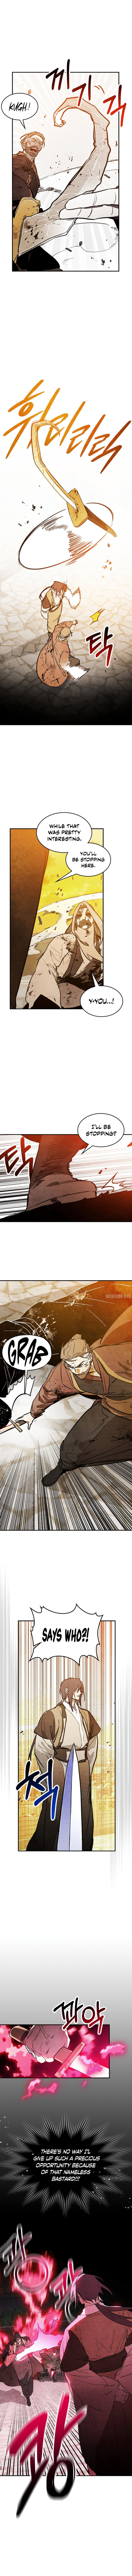 chronicles-of-the-martial-gods-return-chap-84-2